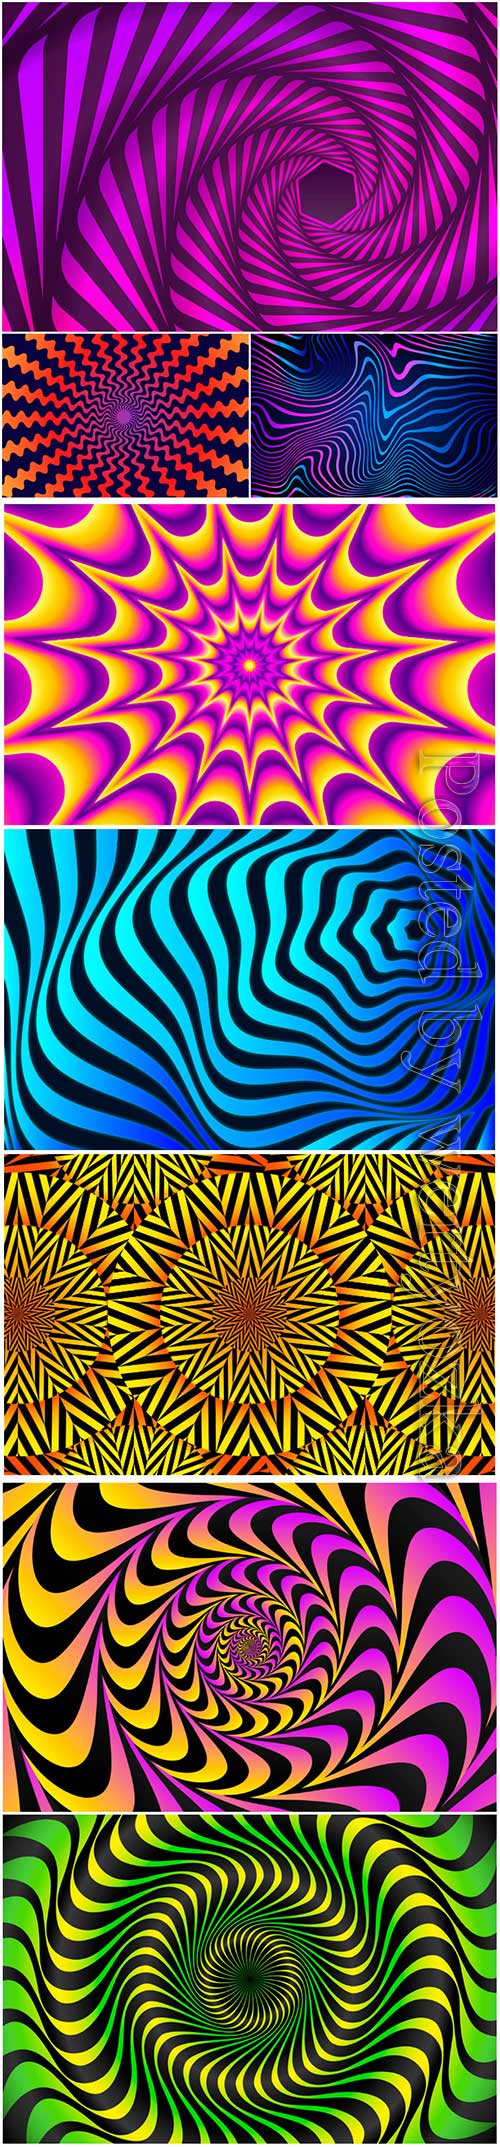 Psychedelic optical illusion vector background # 4